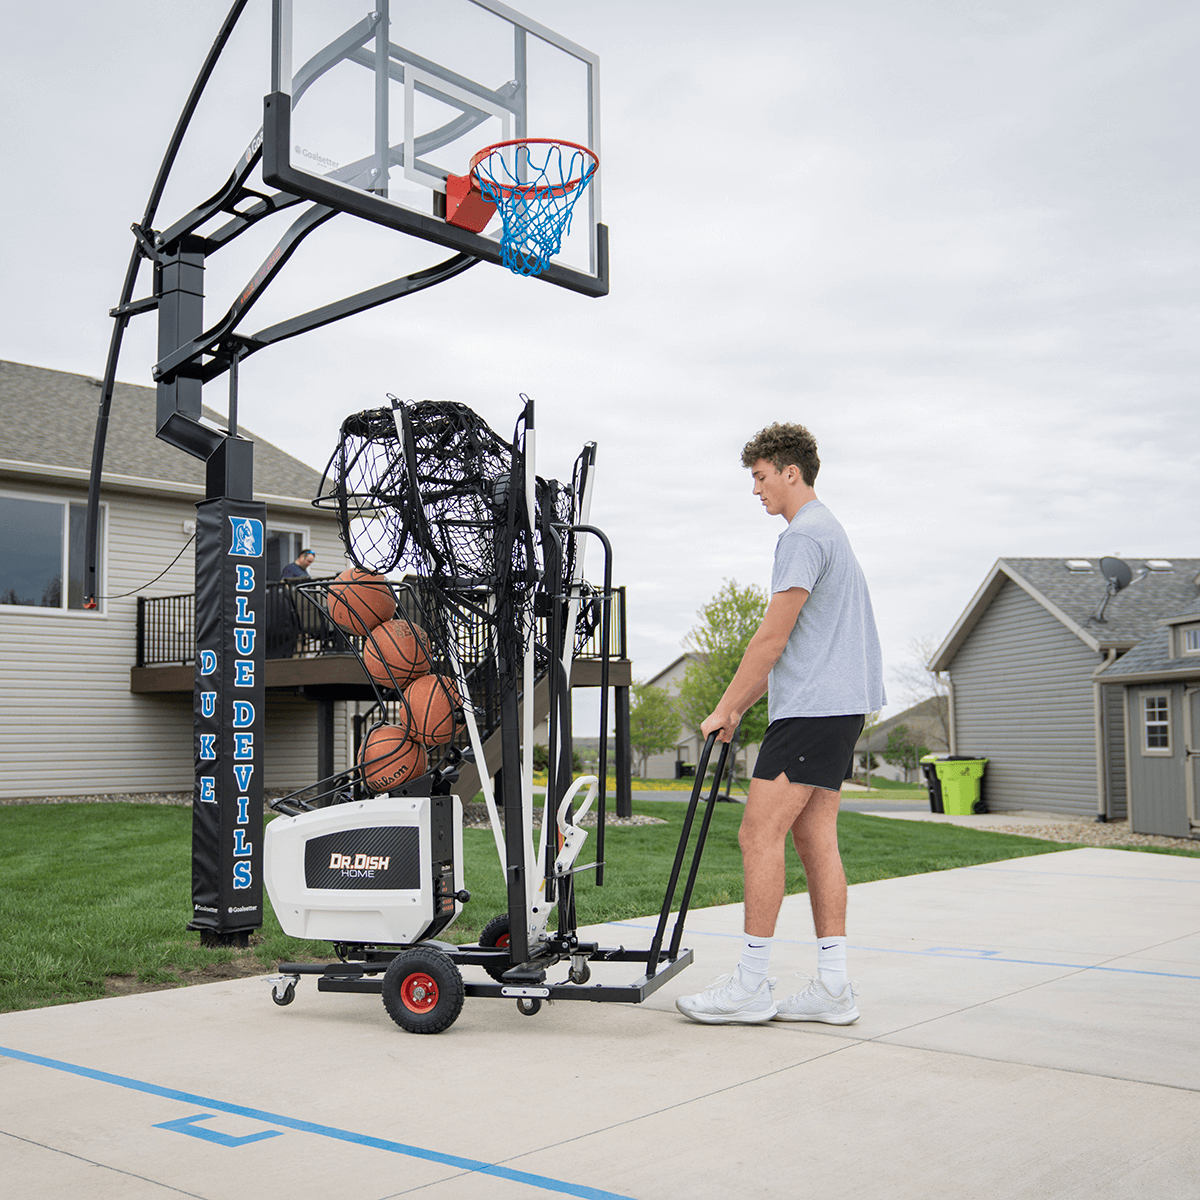 How much Does a Dr. Dish Basketball Shooting Machine Cost?